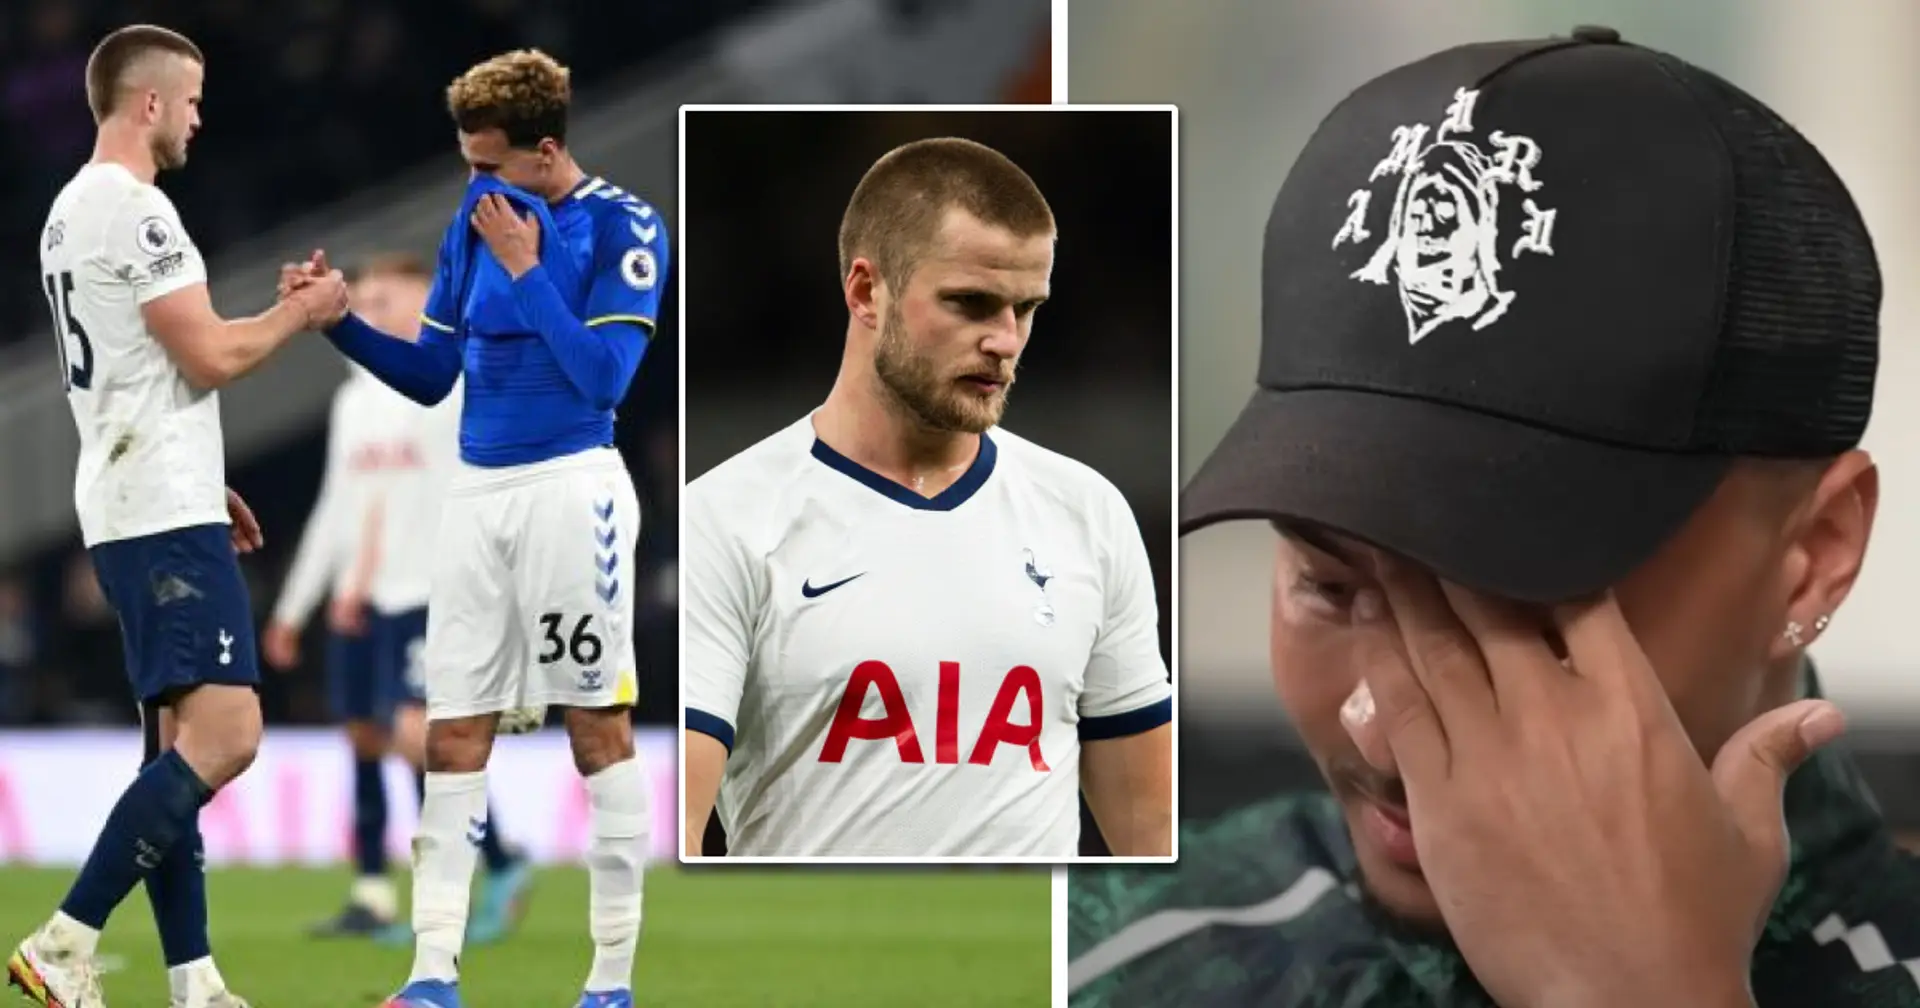 'I’m upset with myself': Eric Dier regrets he couldn't help Dele Alli